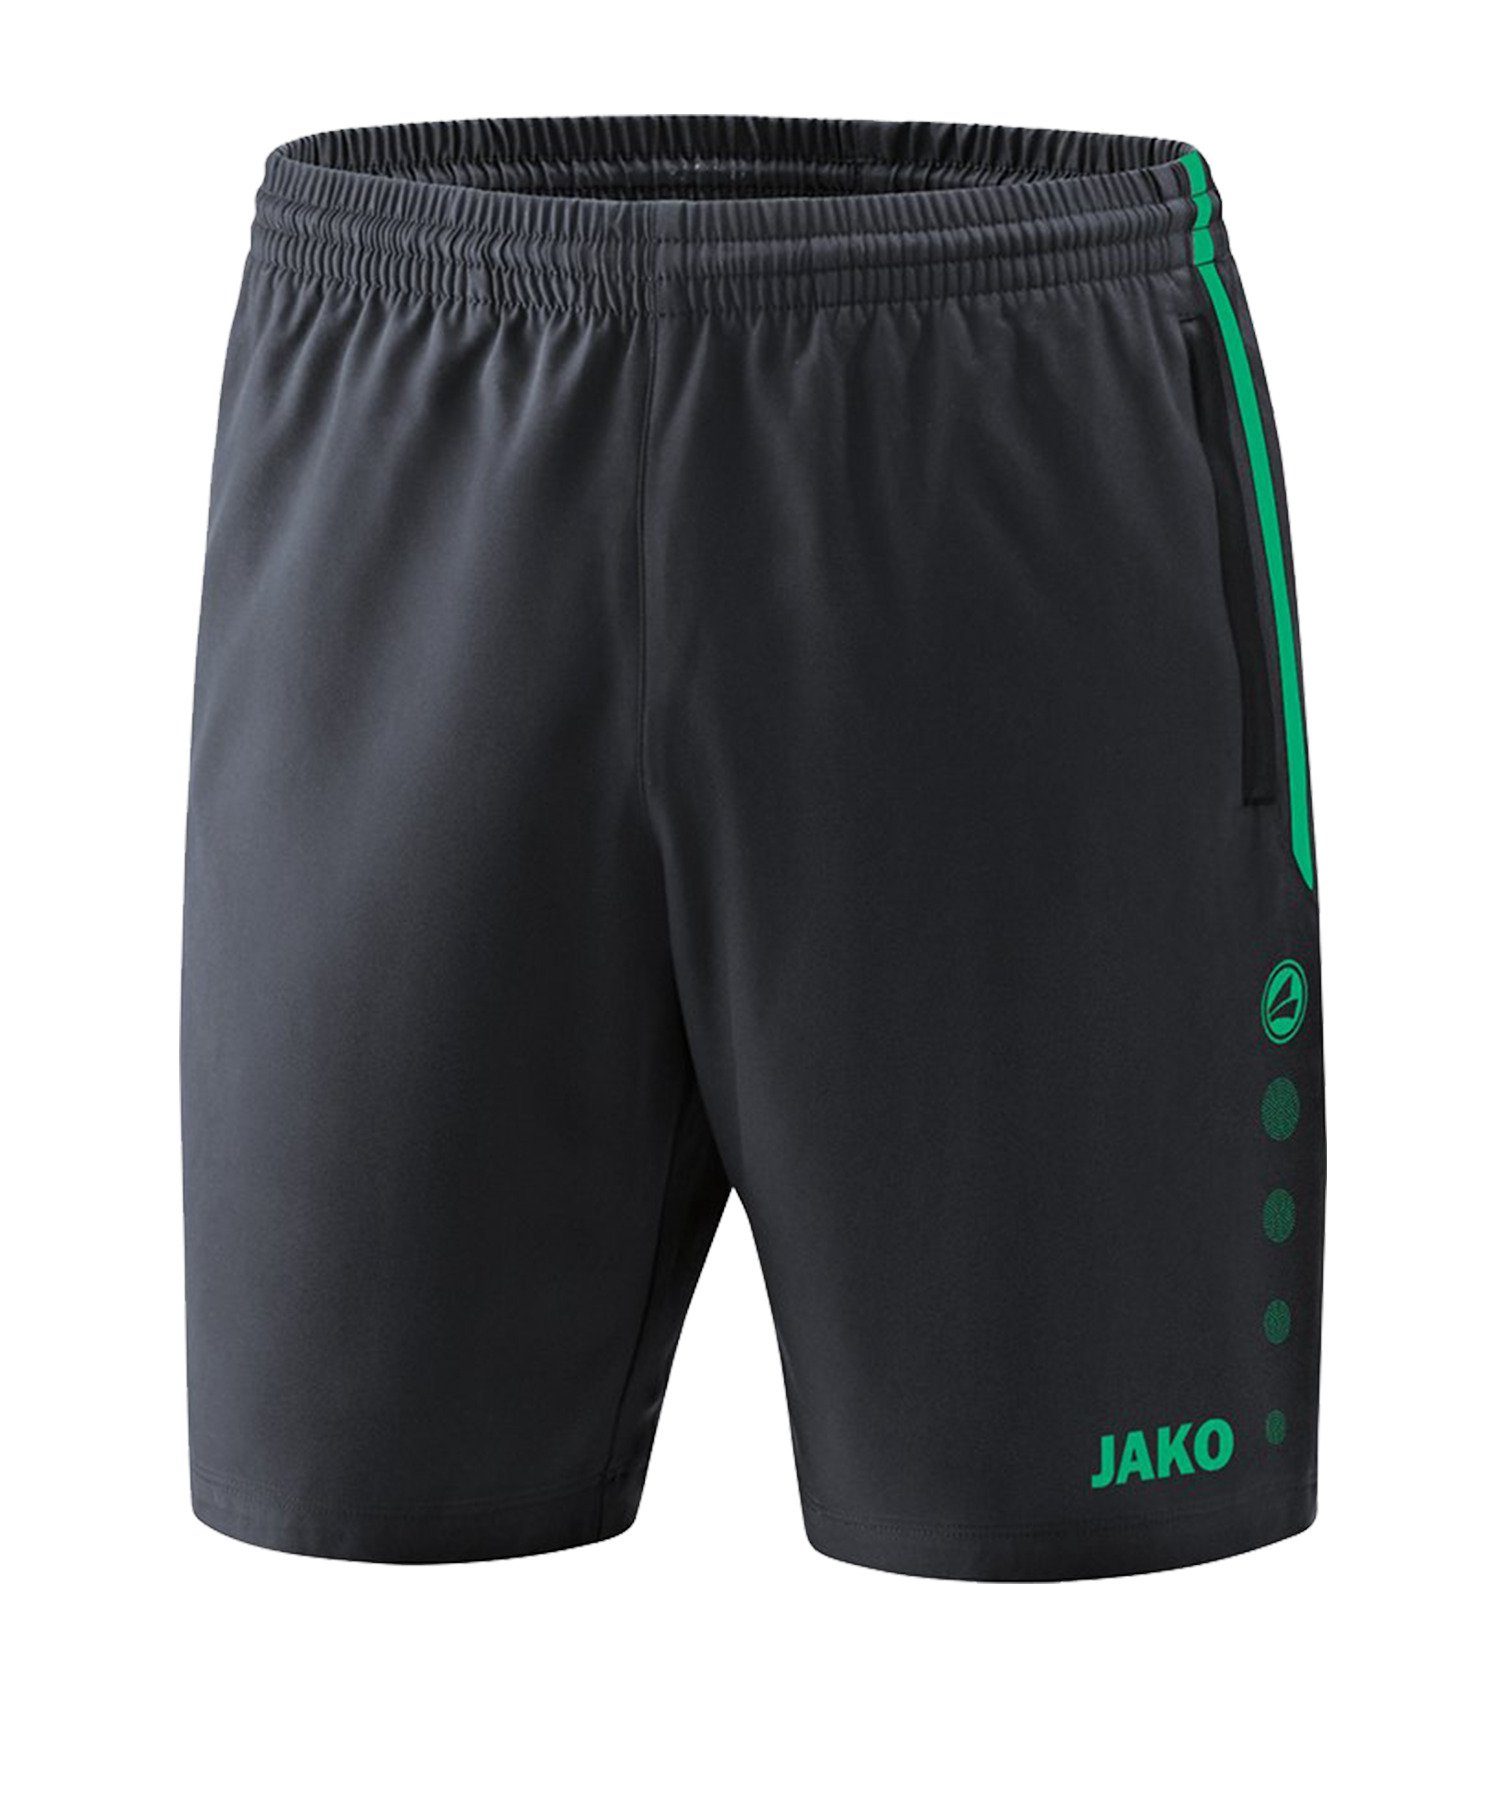 Jako Grautuerkis Sporthose Competition Short 2.0